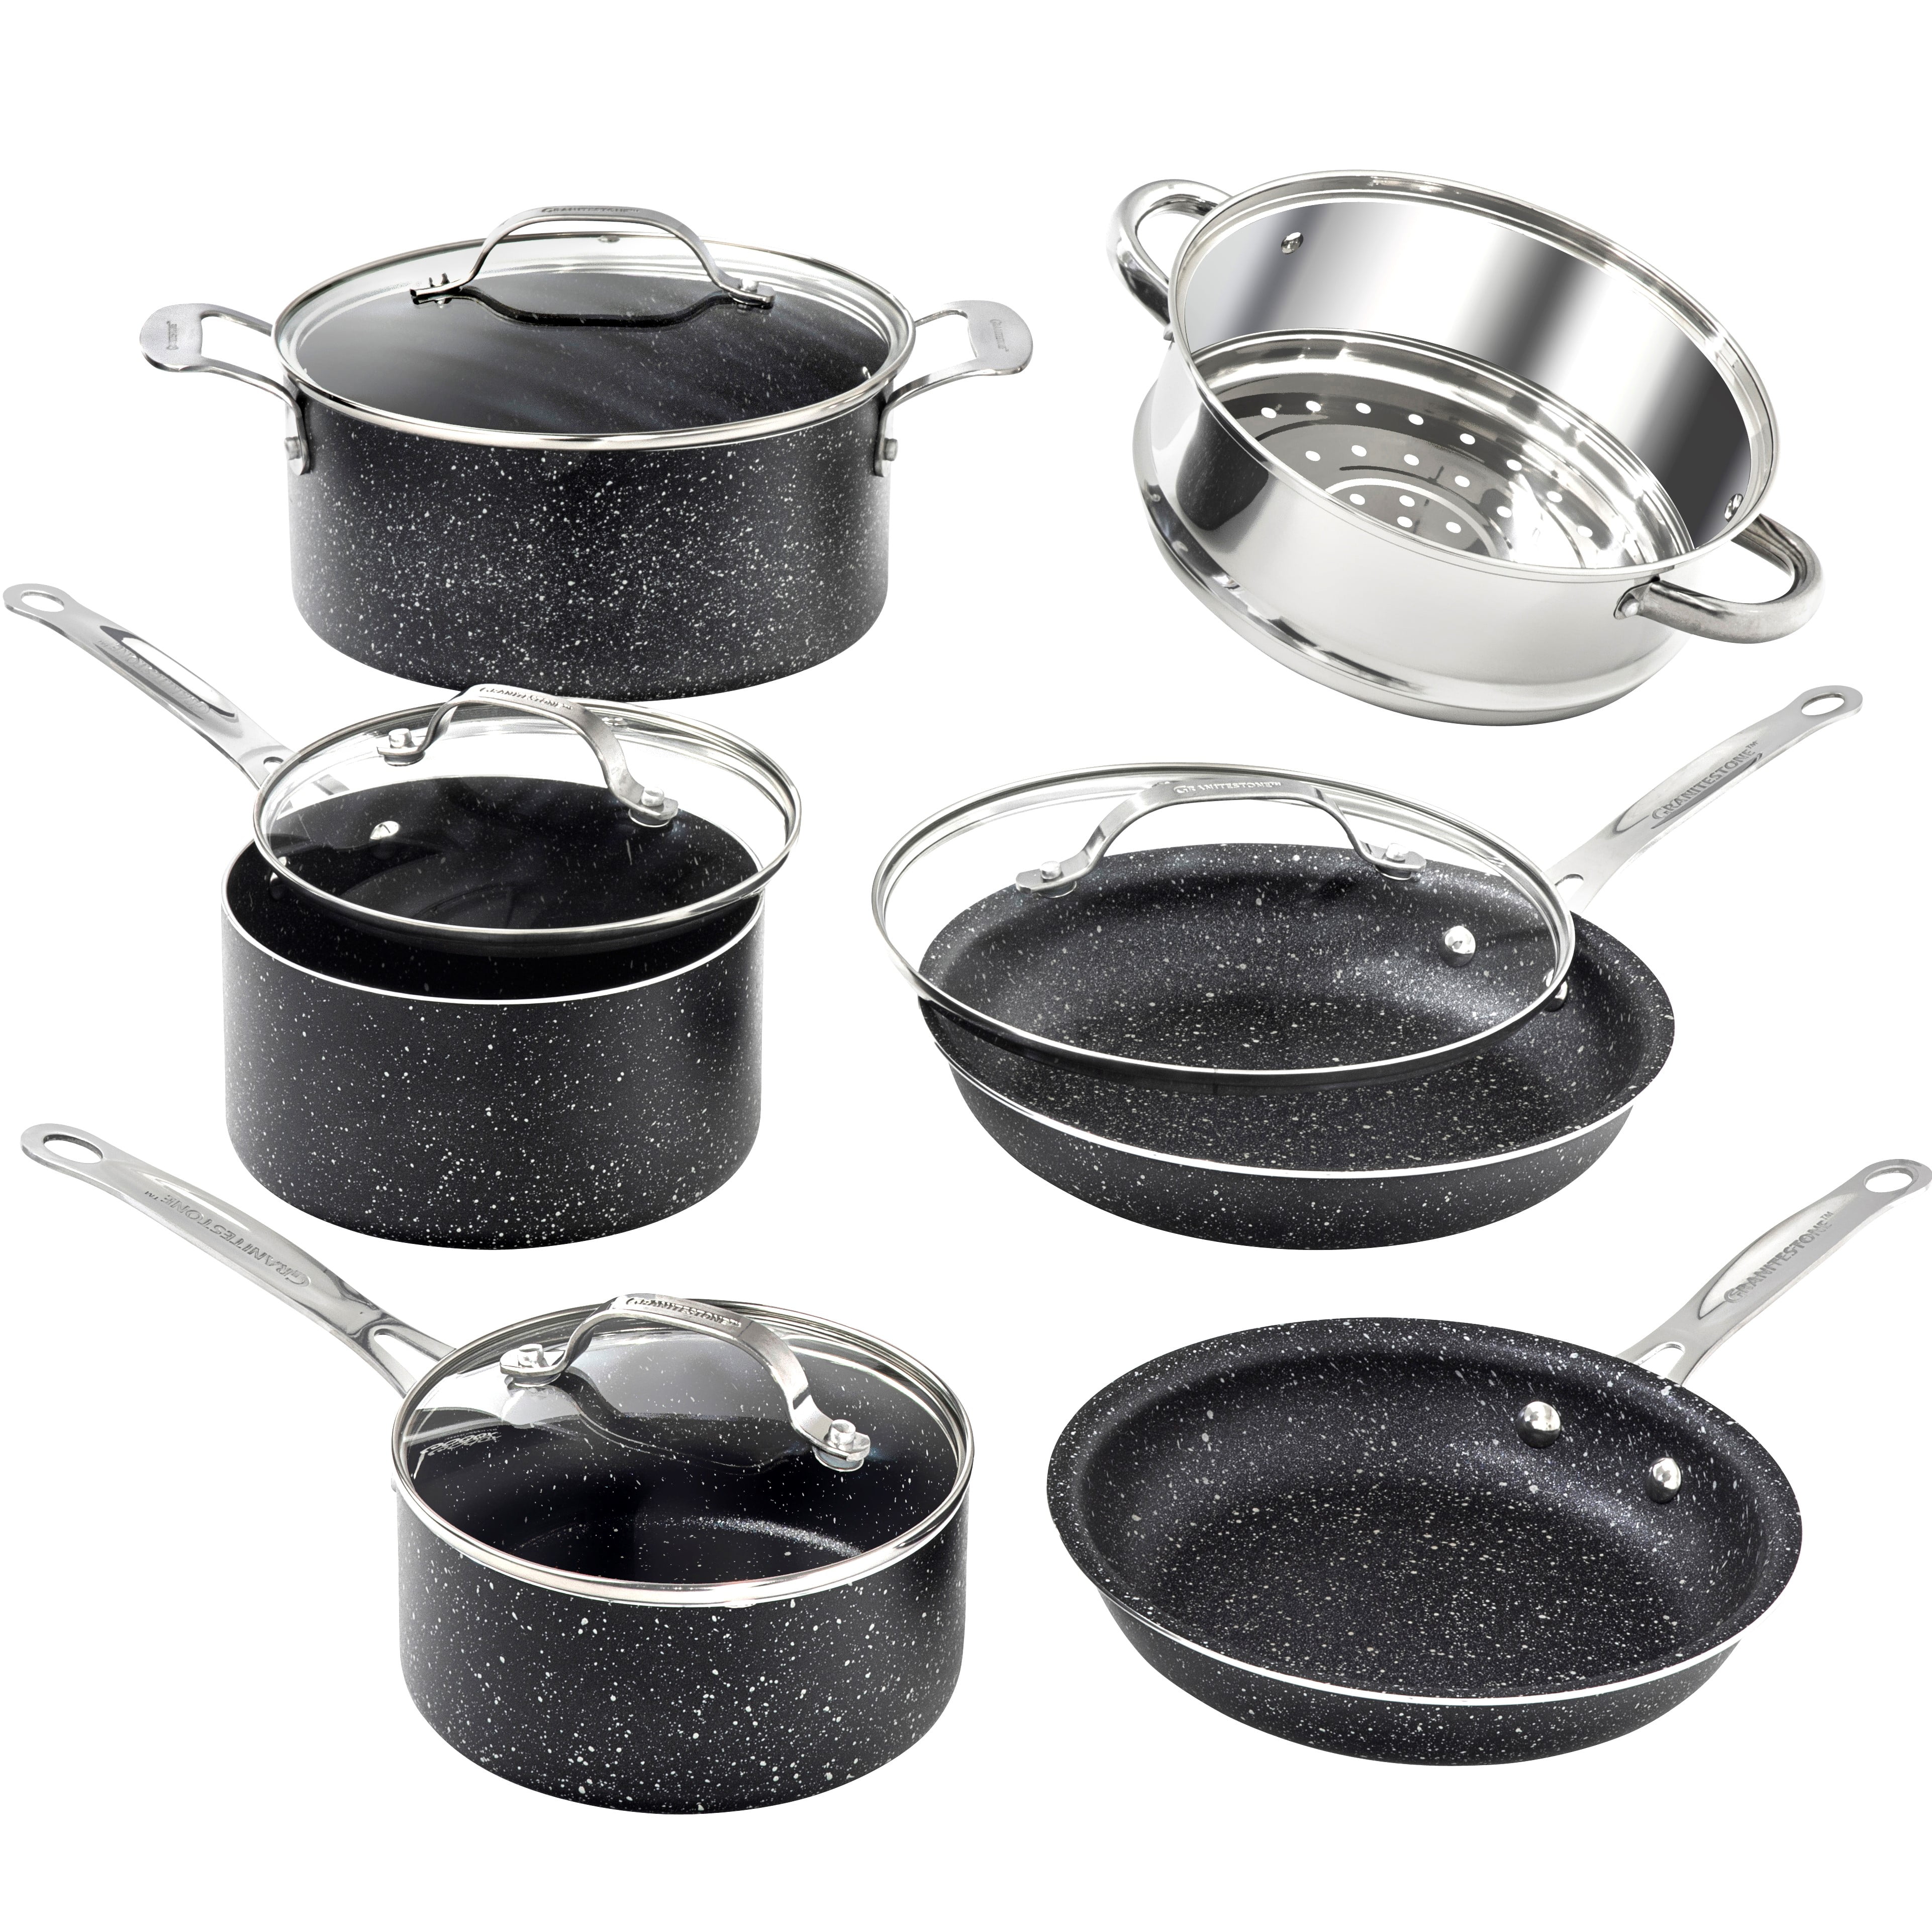 The Rock by Starfrit 8-Piece Cookware Set with Bakelite Handles 